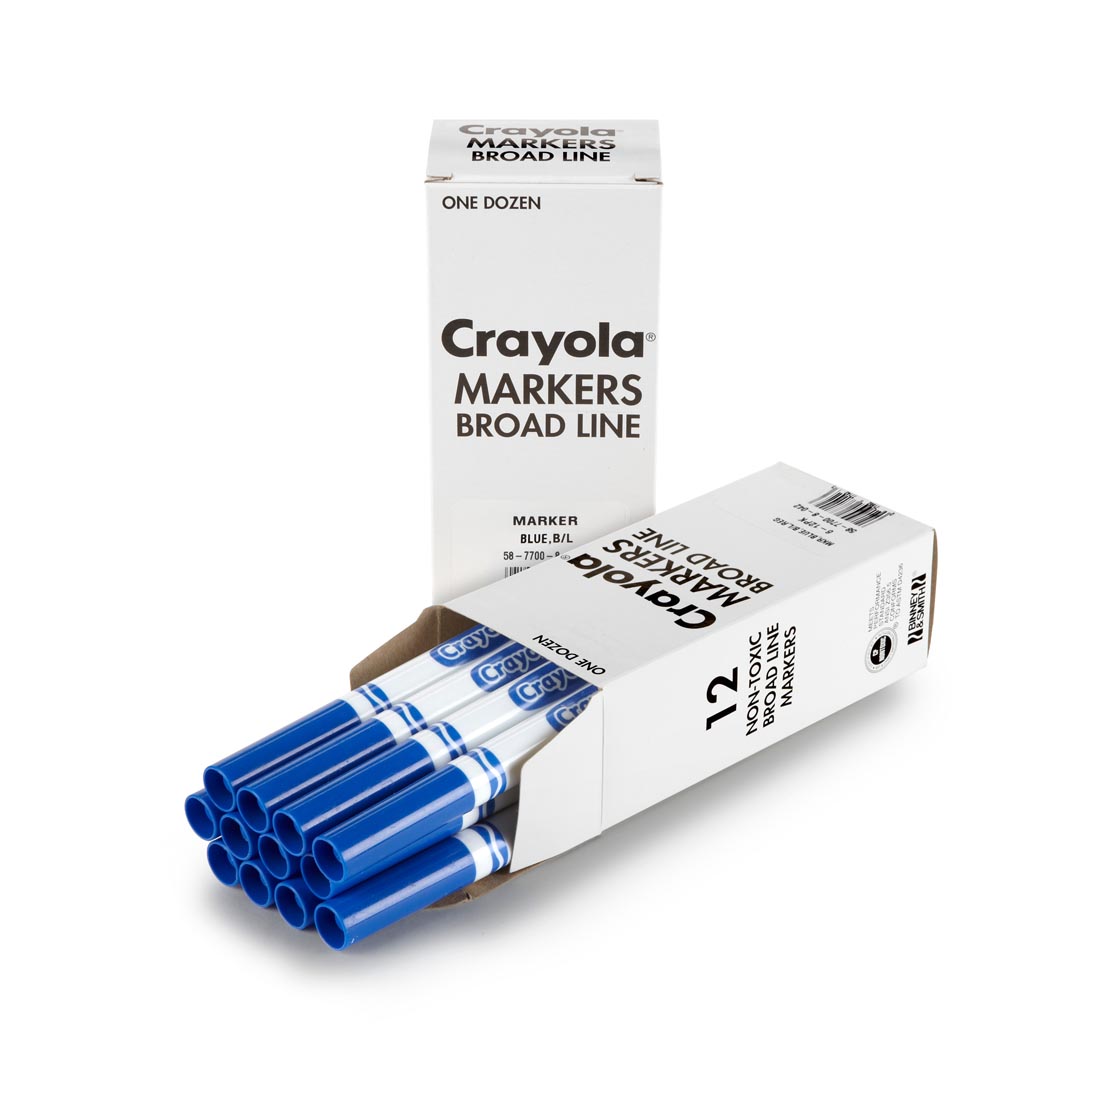 Box of Crayola Broad Line Marker Refills shown both closed and open with 12 Blue Markers